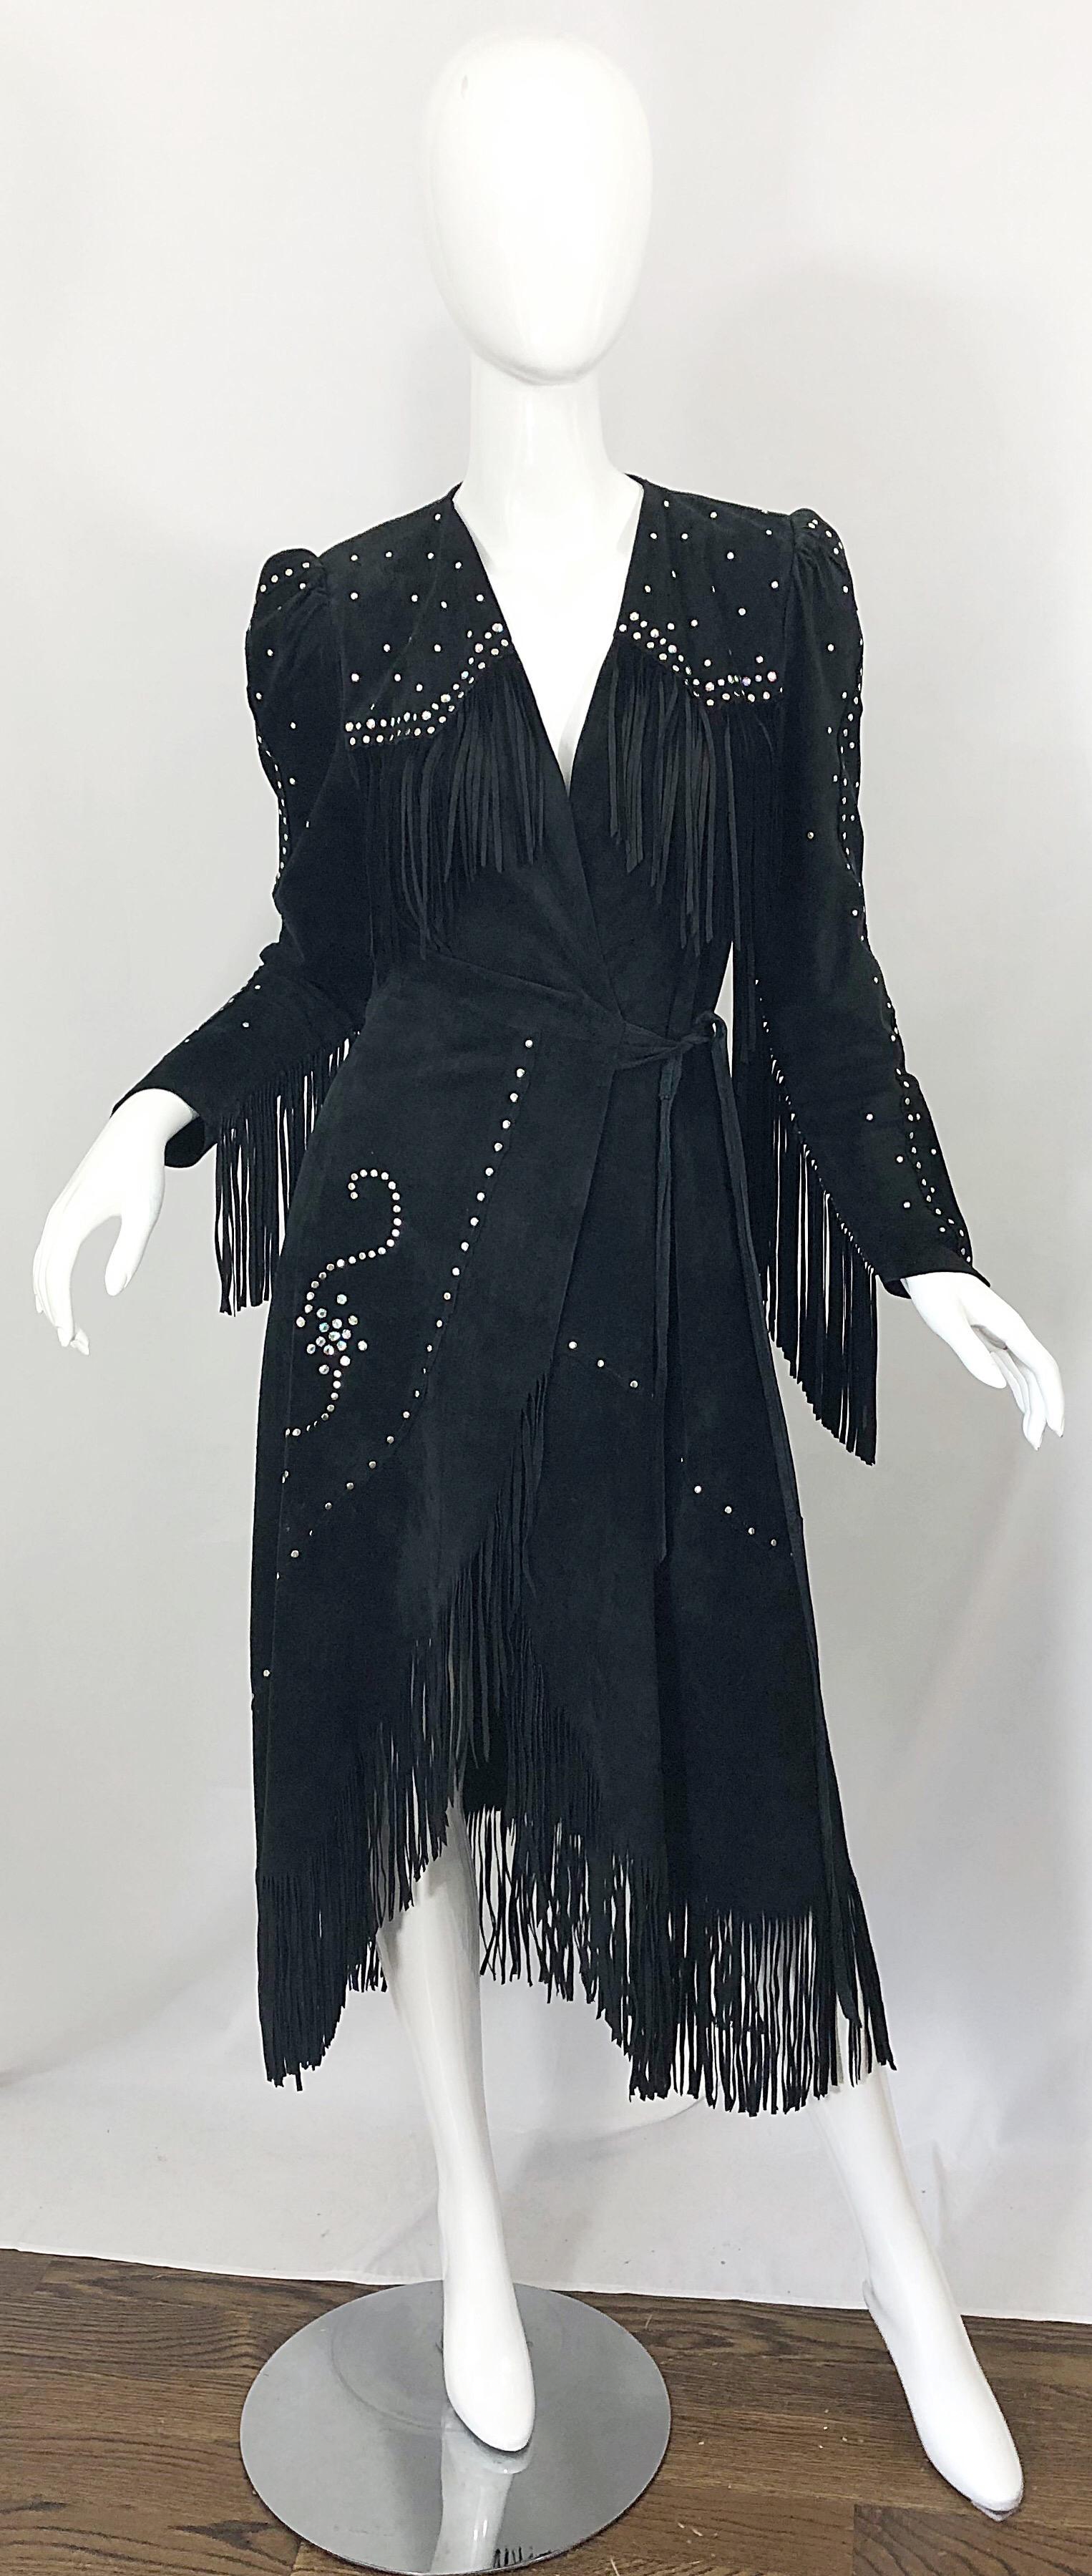 MUSUEM PIECE! Amazing and rare vintage 70s LOVE, MELODY black suede leather fringe rhinestone/studded wrap dress! Melody Sabatasso is a respected designer, known for her work with old Levi's. She dressed countless celebrities in the 1970s, including